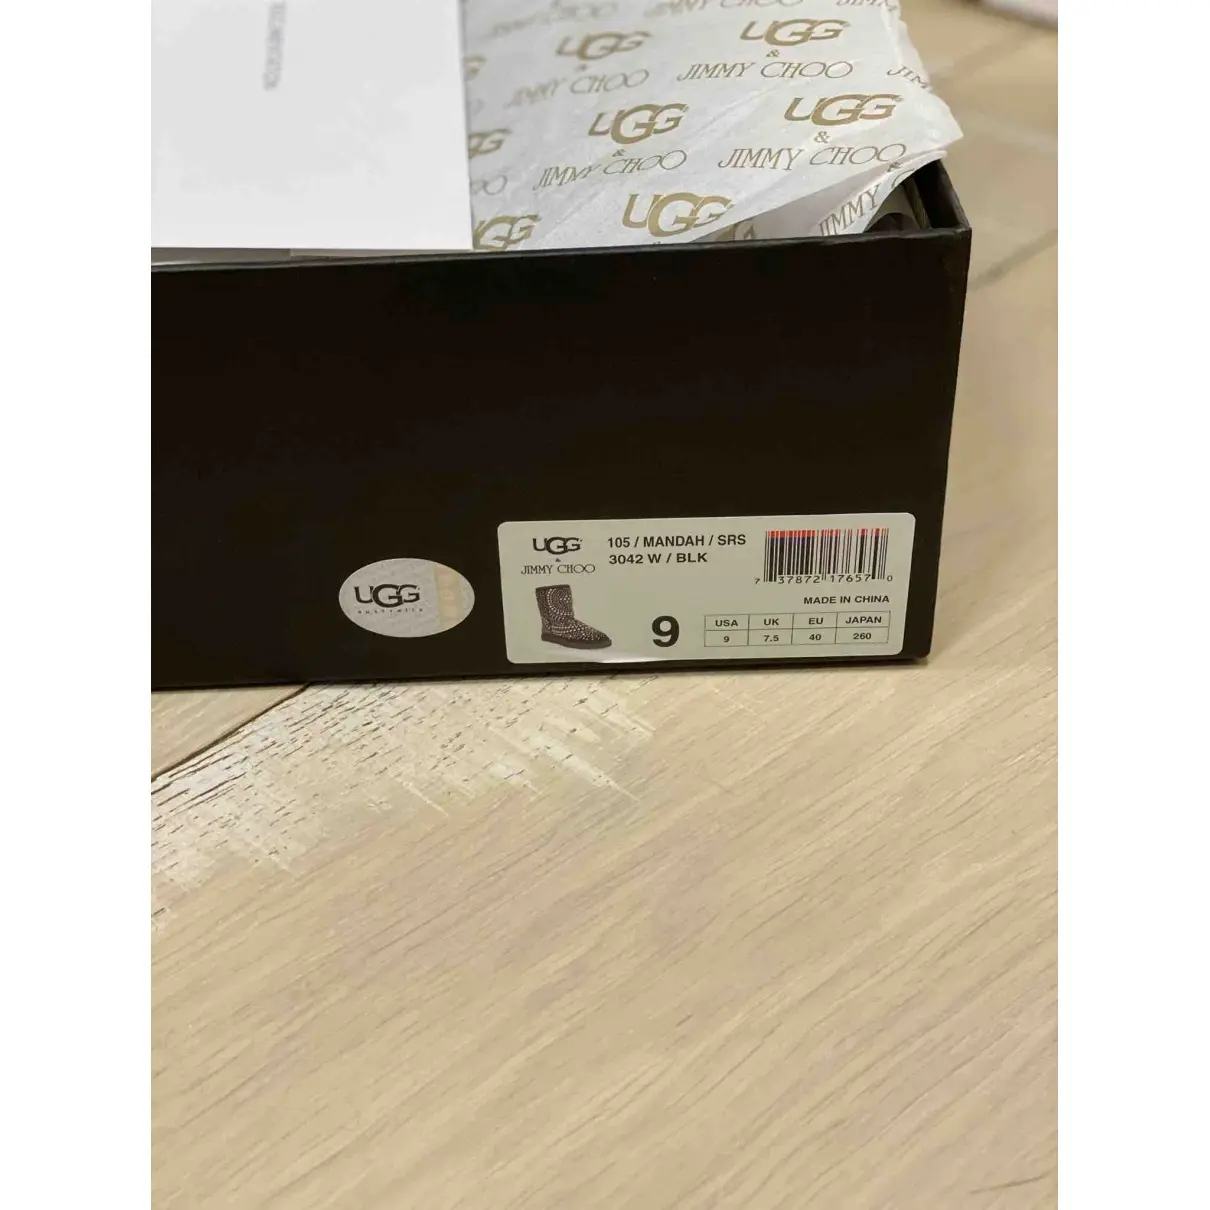 Ugg & Jimmy Choo Snow boots for sale